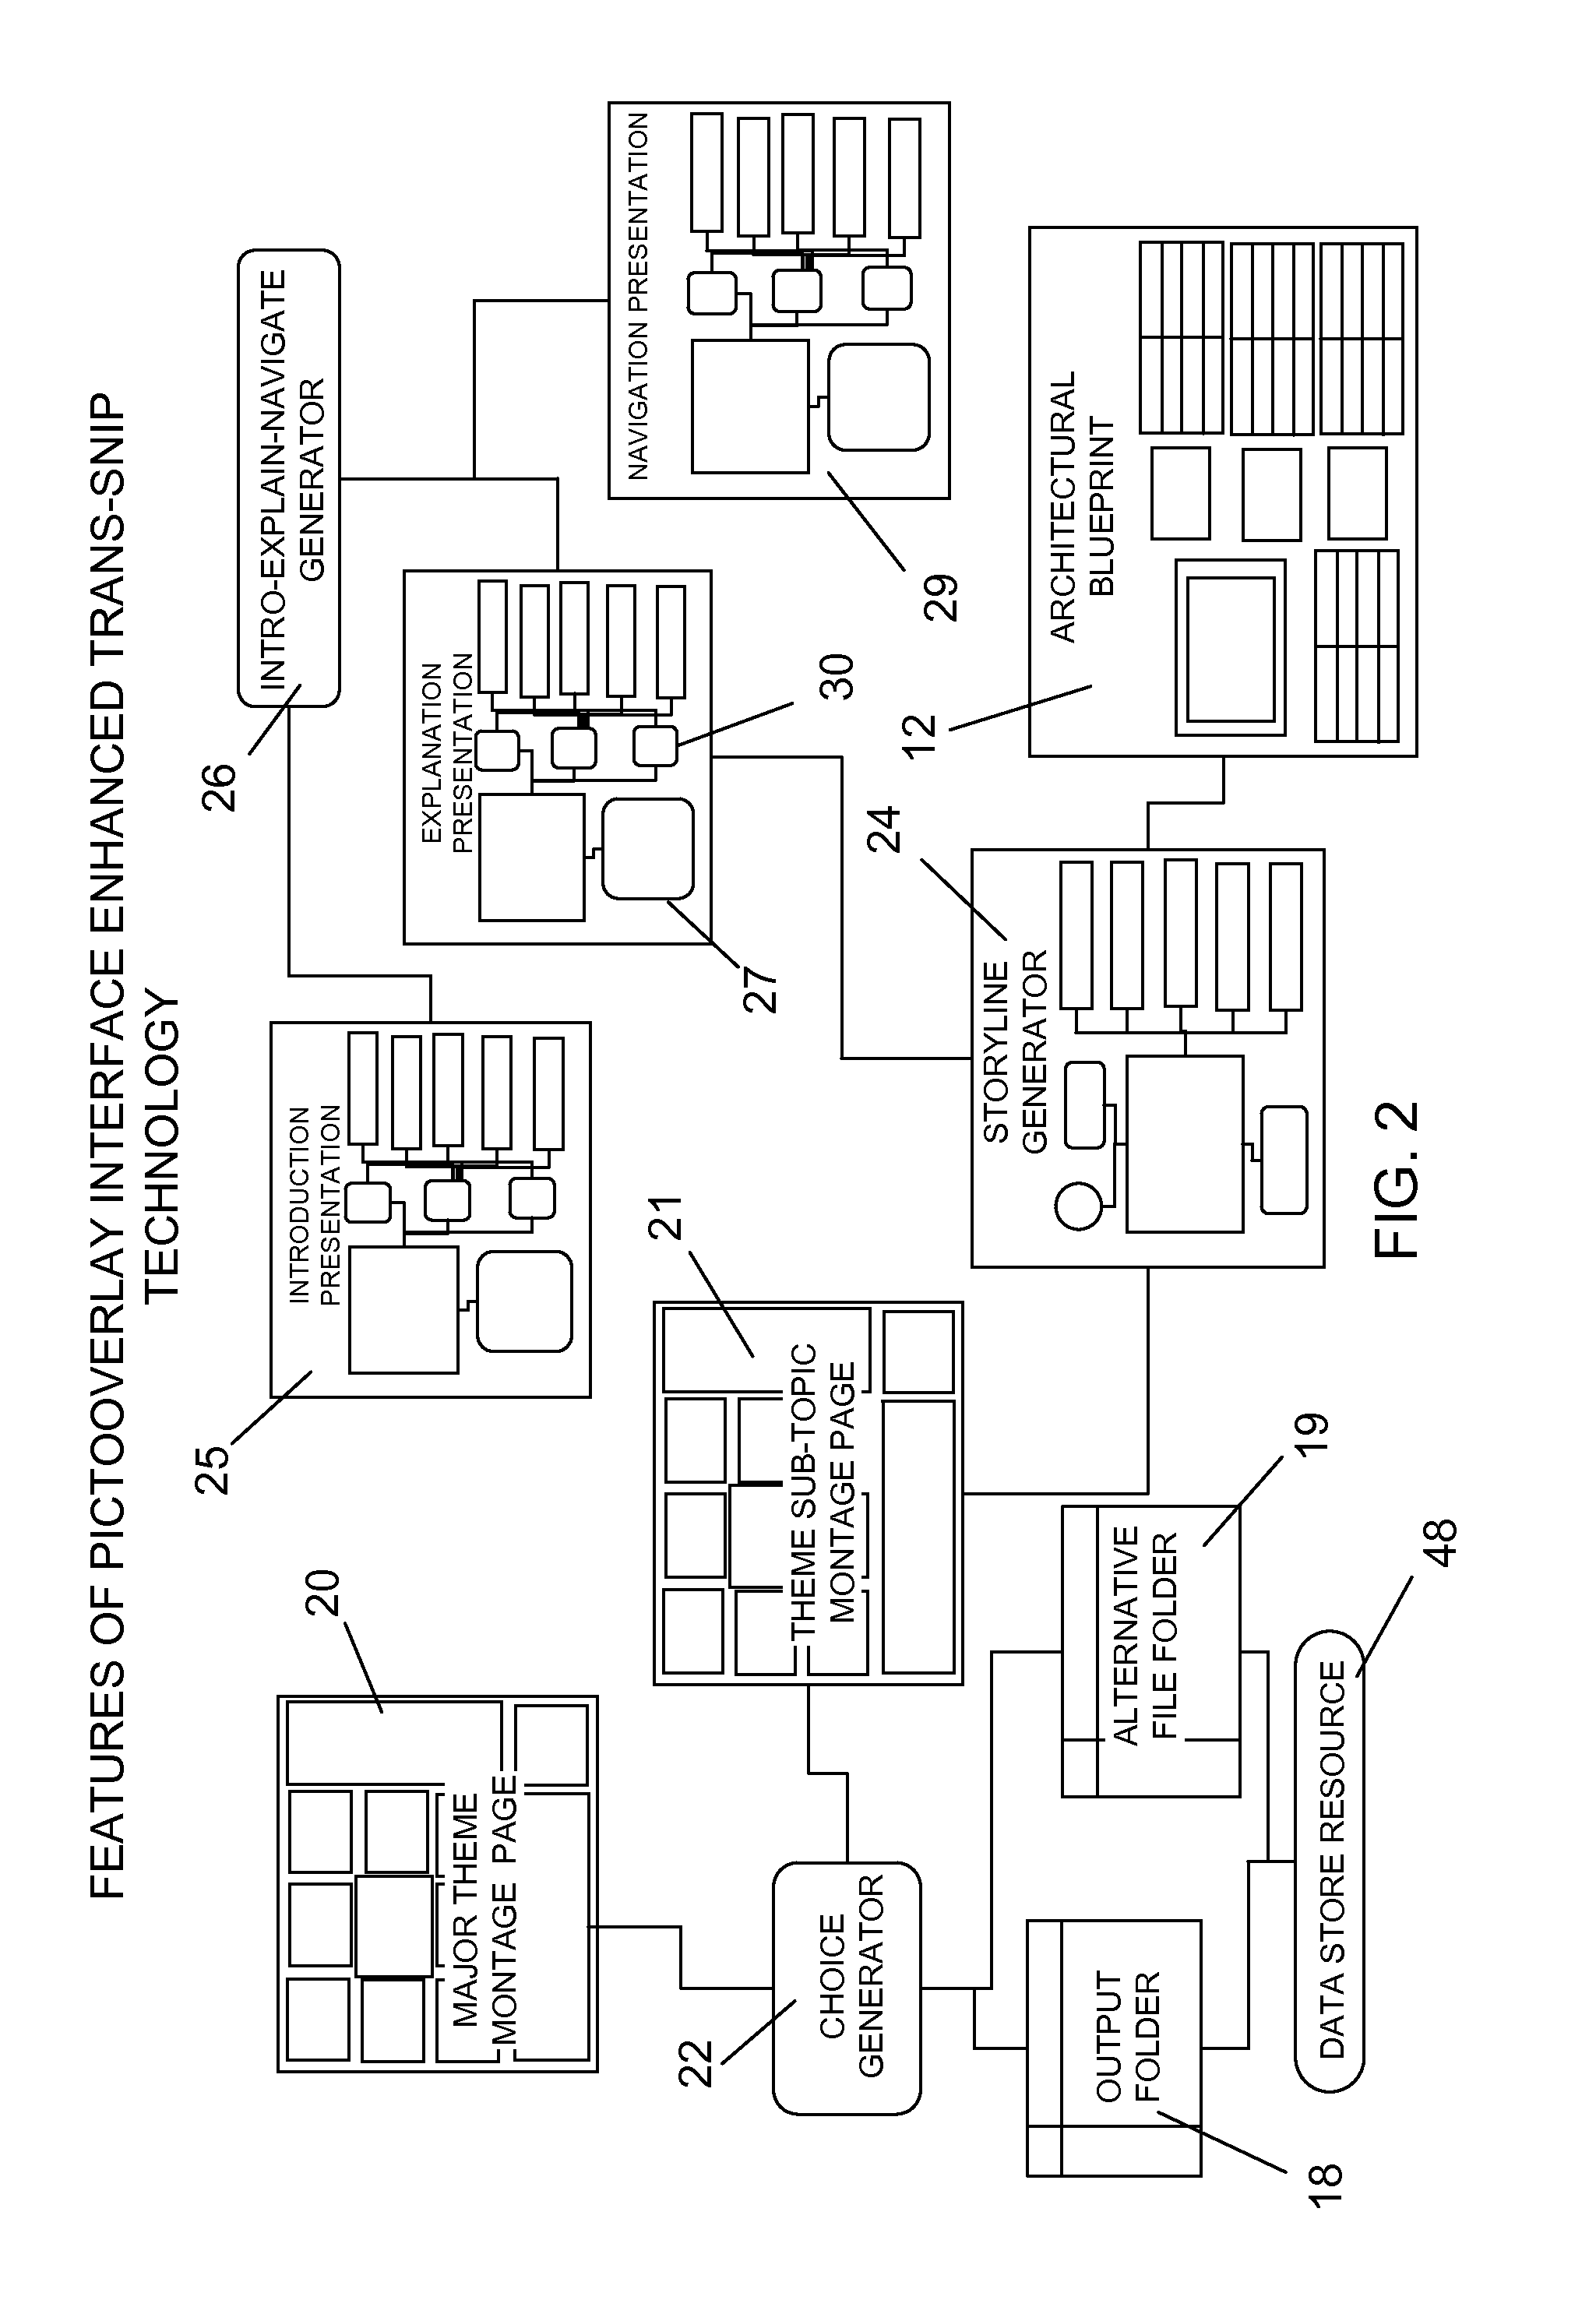 System and method for a universal resident scalable navigation and content display system compatible with any digital device using scalable transparent adaptable resident interface design and picto-overlay interface enhanced trans-snip technology